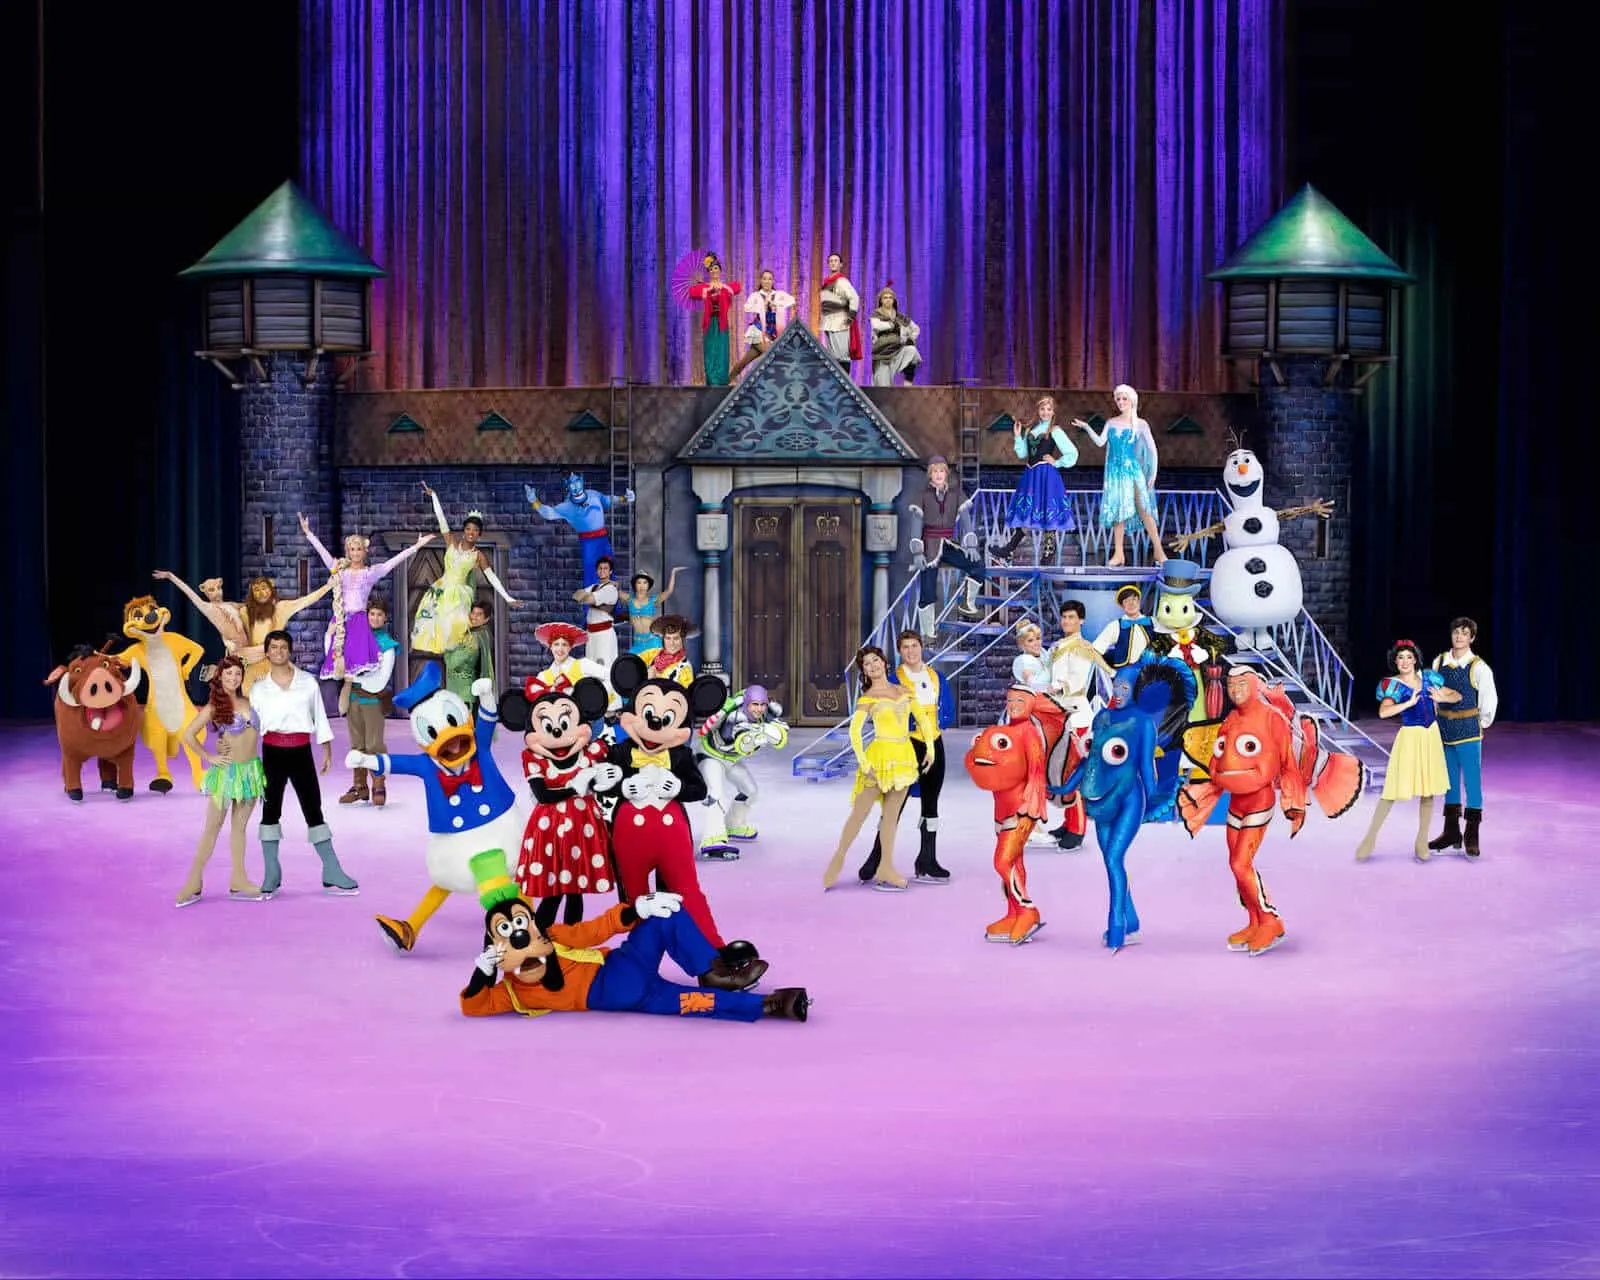 Disney characters perform at Disney on Ice.